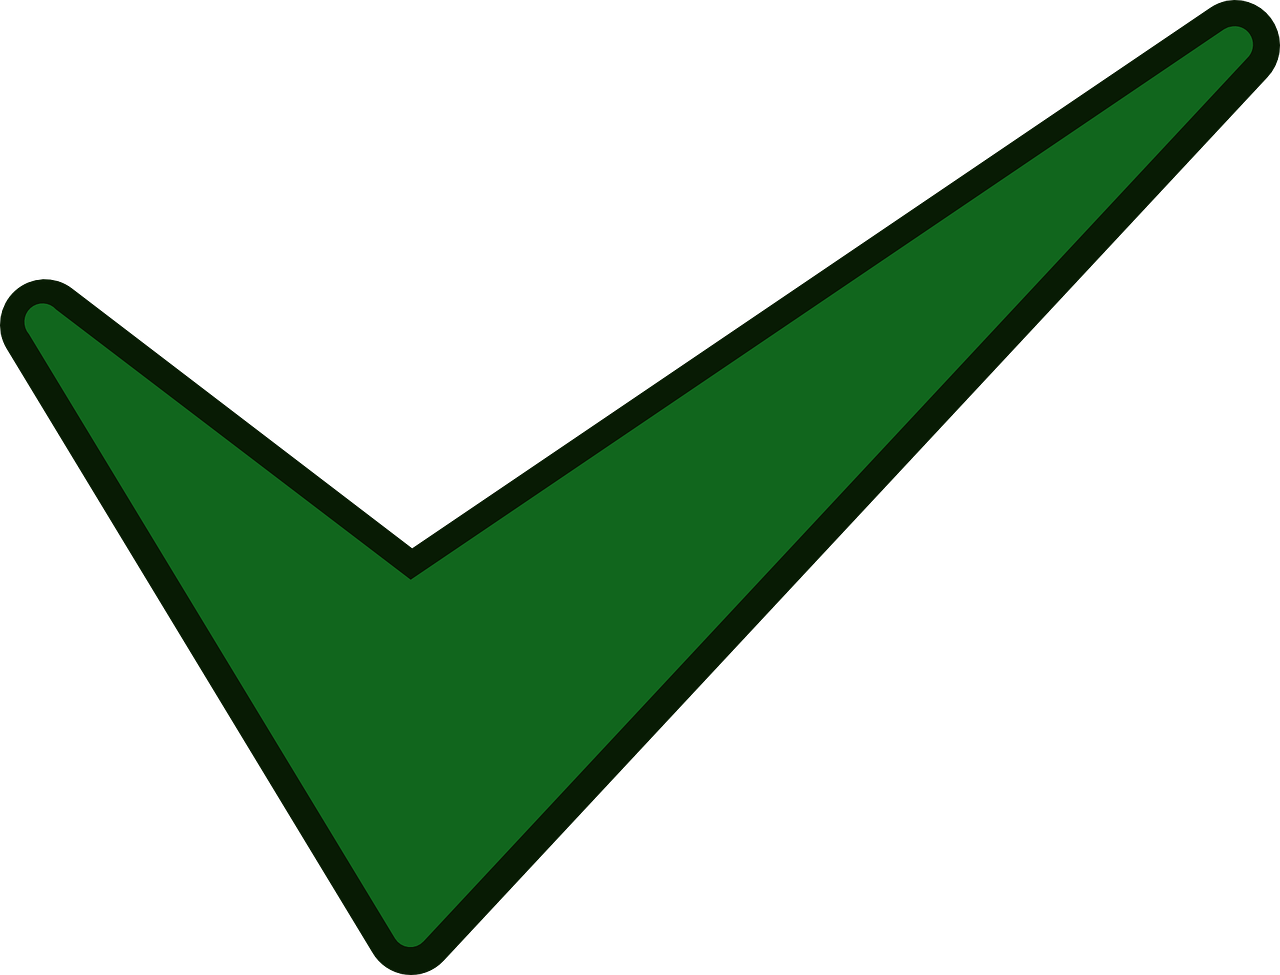 the tick symbol is placed on a green background